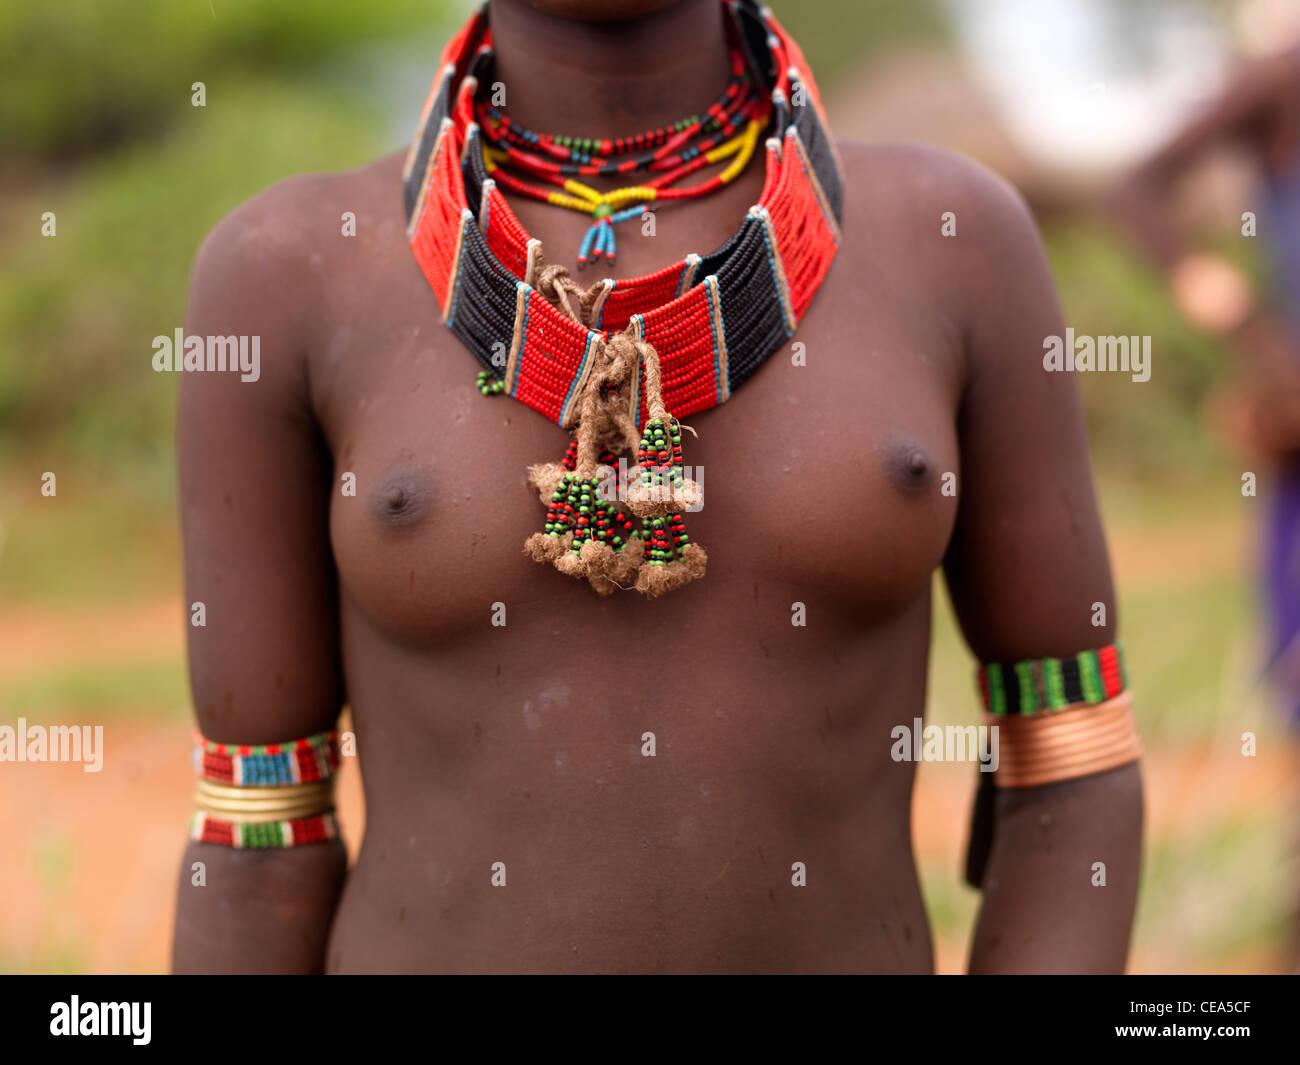 African tribe boobs